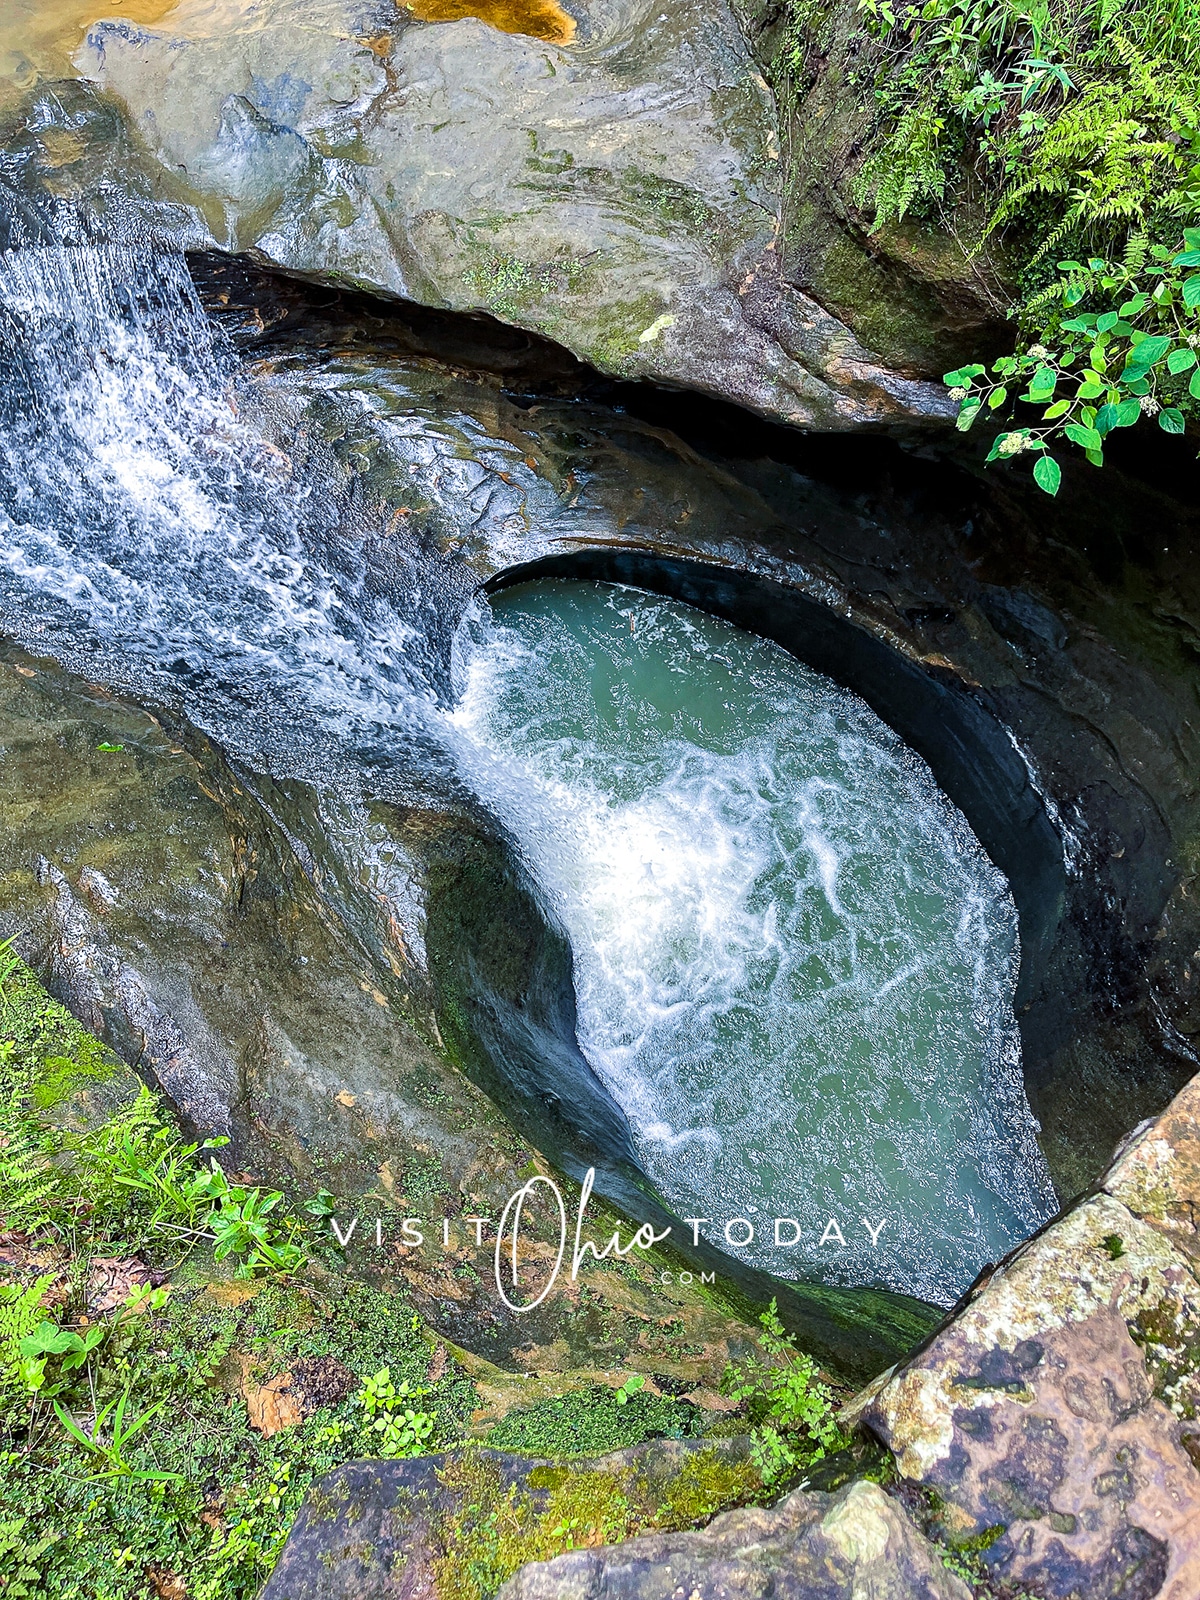 vertical photo that is an overhead shot of Devil's Bathtub Hocking Hills. It shows the waterfall falling into the pool Photo credit: Cindy Gordon of VisitOhioToday.com